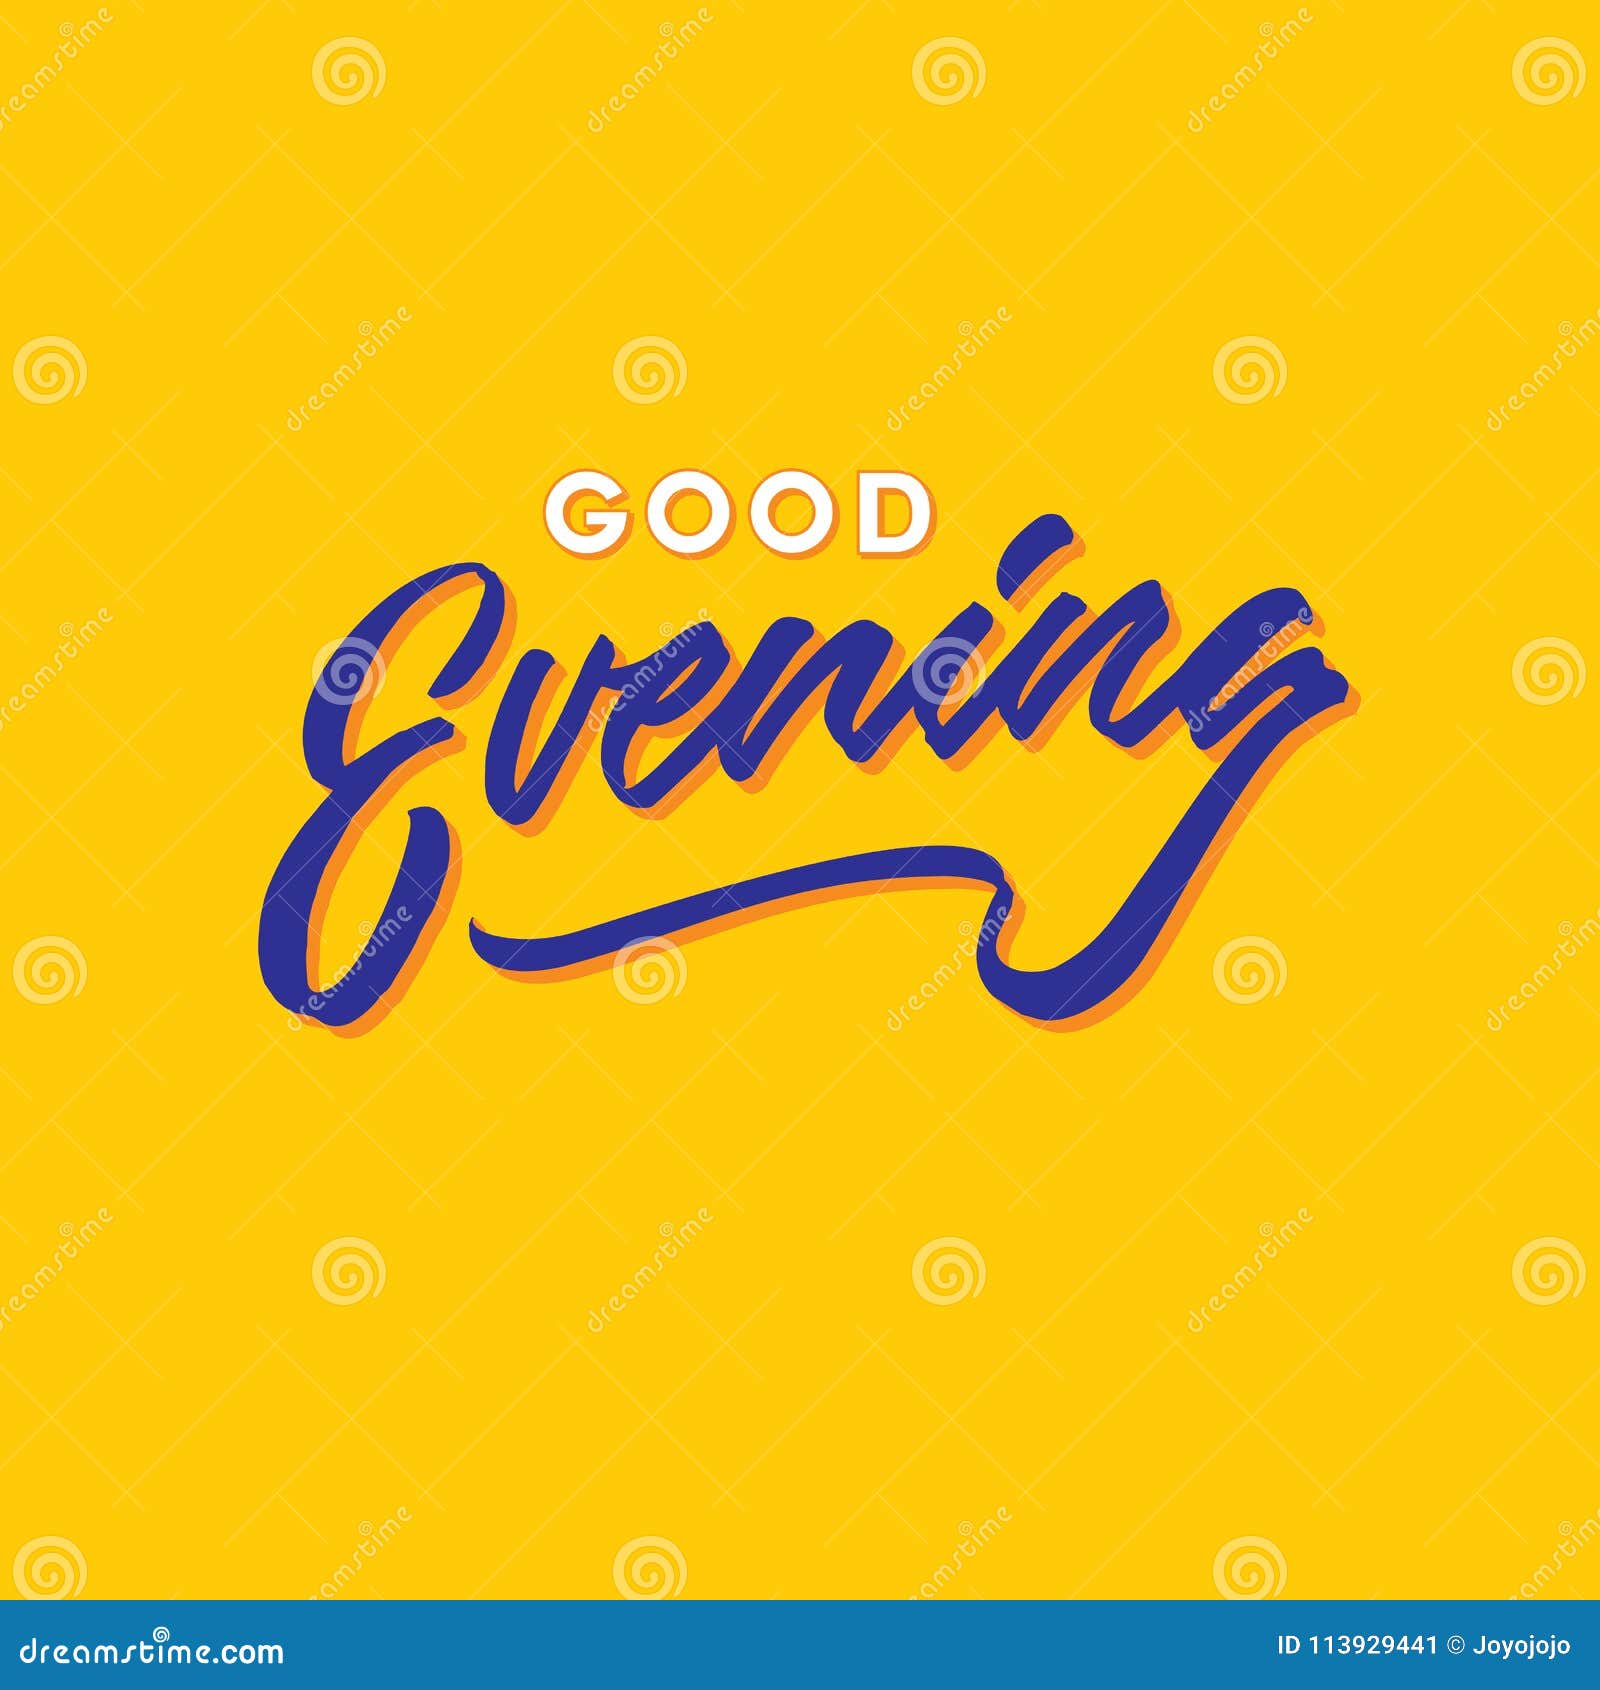 Good Evening Hand Lettering Typography Greeting Card Poster Stock ...